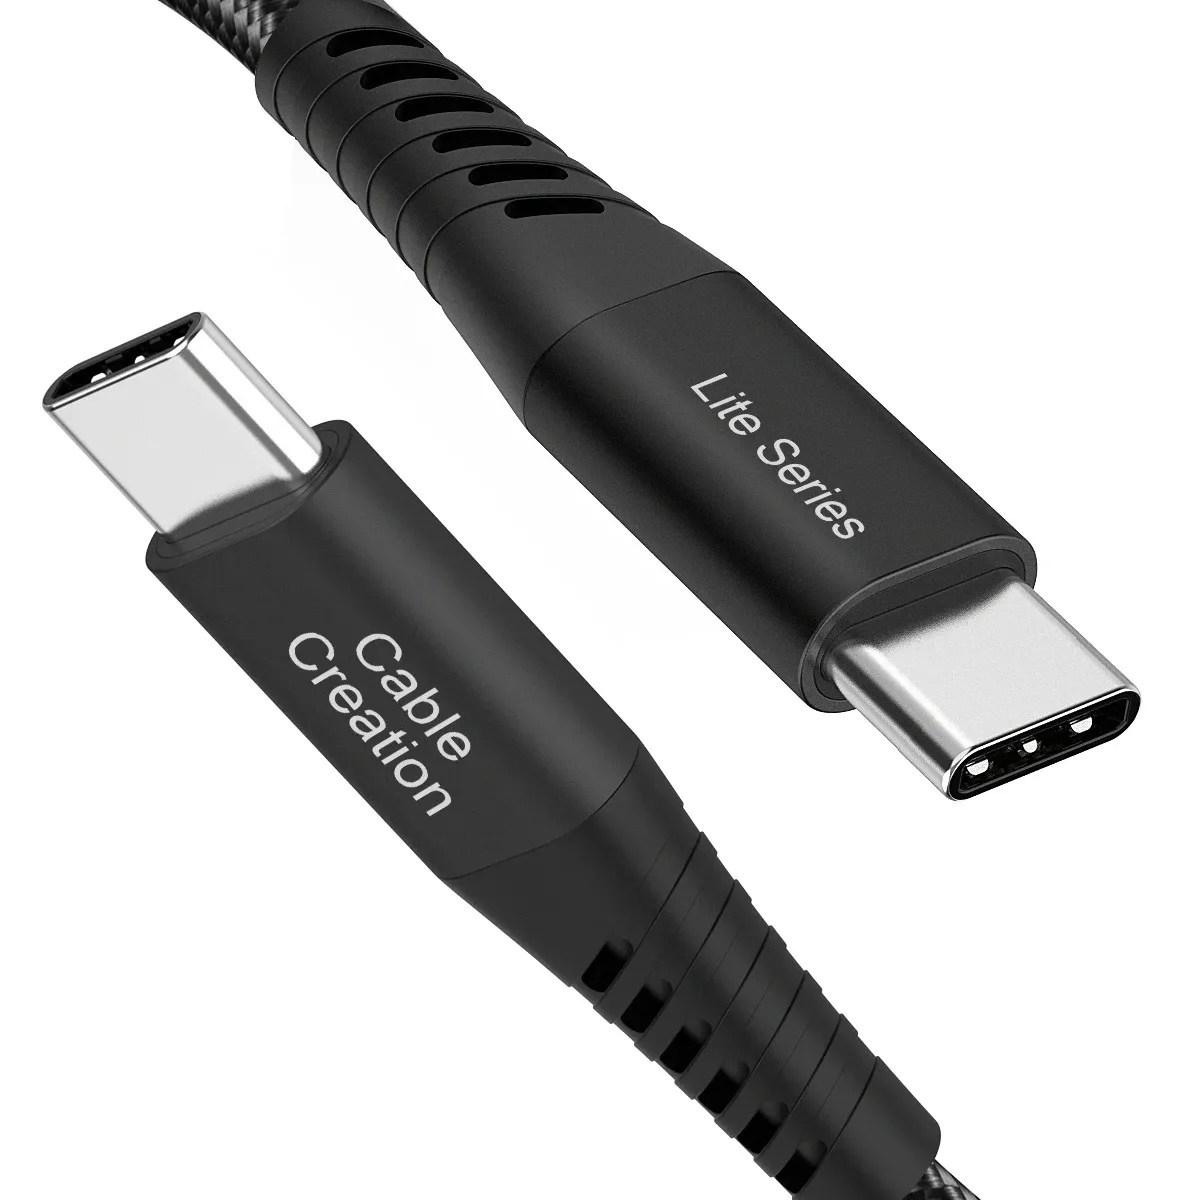 CableCreation lite series usb 2.0 fast charging type-c data cable cord for samsung